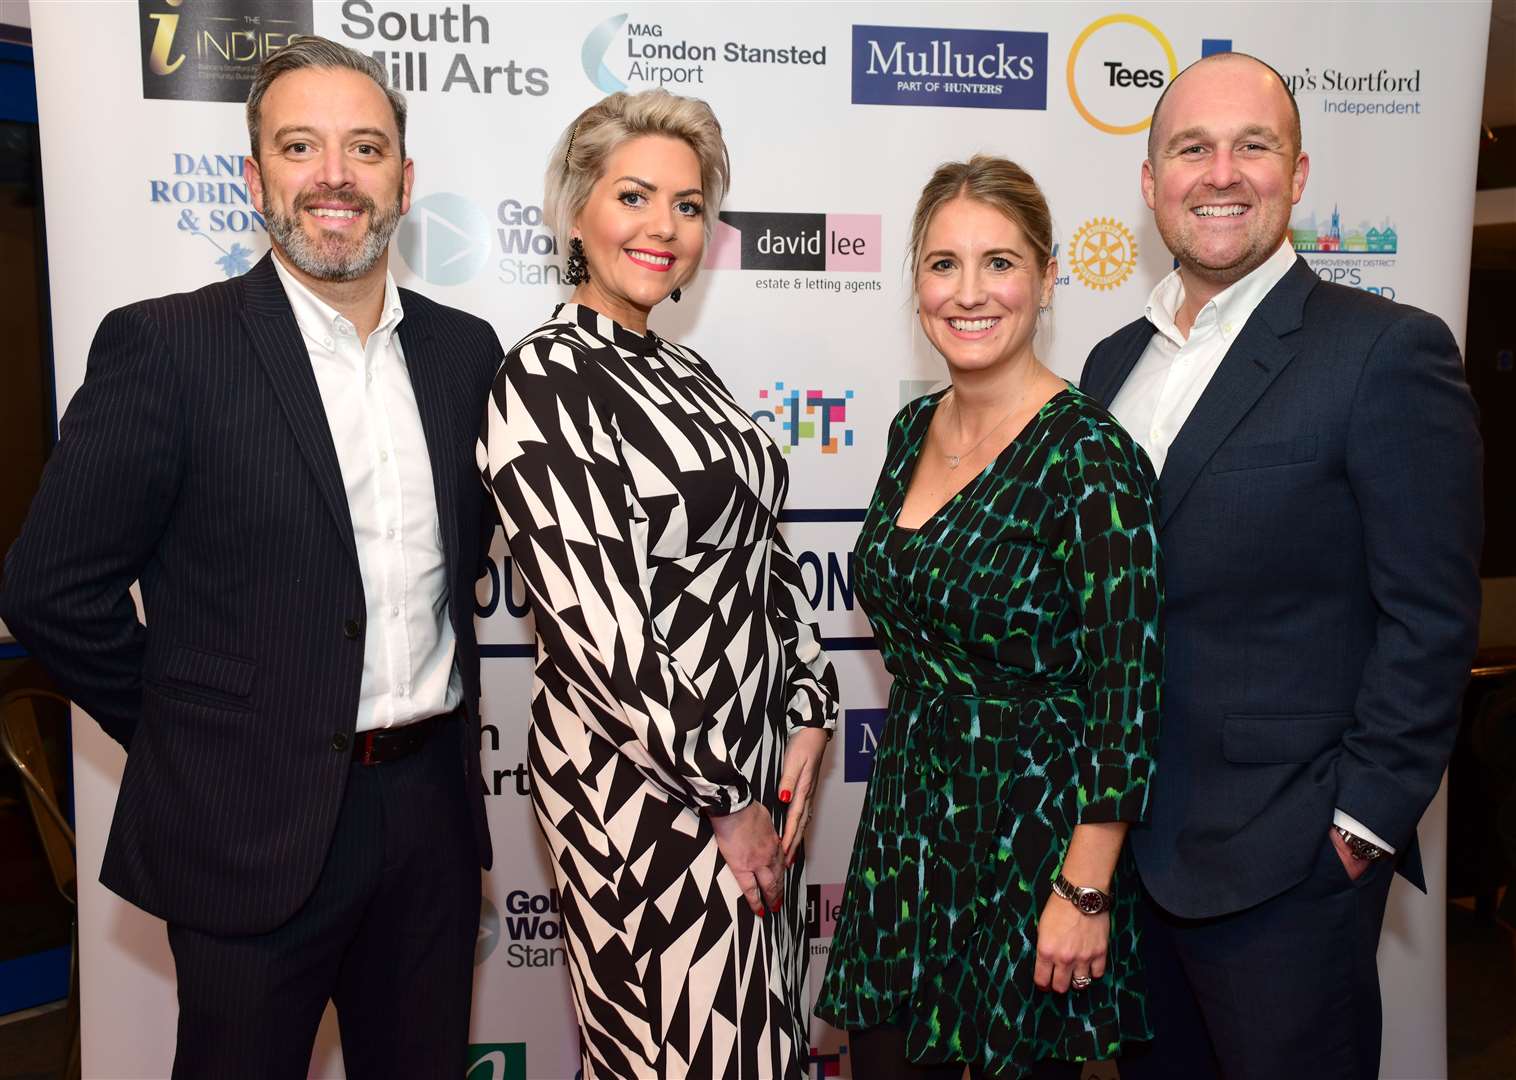 David Lee estate agents sponsored Child of Courage – David Kirby, left, and wife Laura and Lee O'Brien and wife Amy. Pic: Vikki Lince